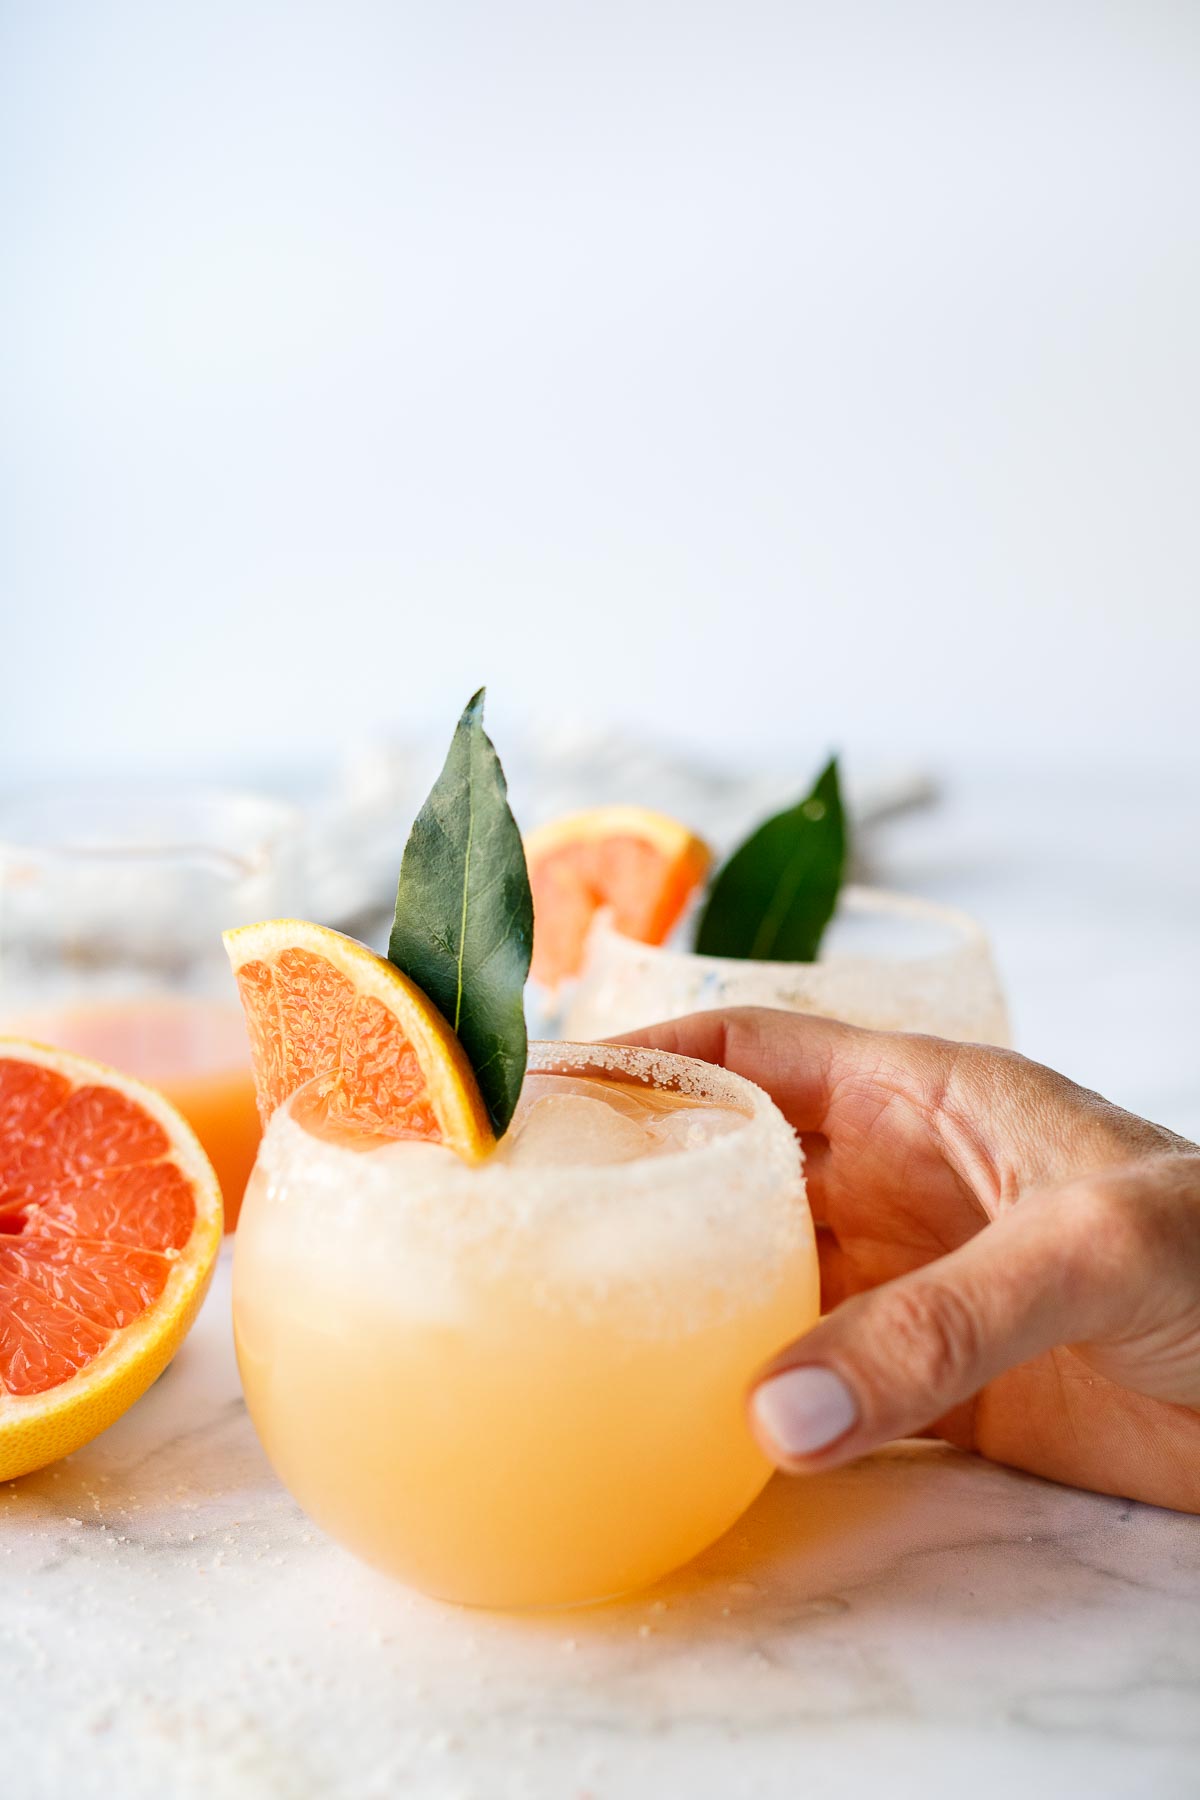 This Paloma cocktail features fresh grapefruit juice and lime juice, tequila blanco and honey simple syrup with a splash of sparkling water. Light and refreshing, it goes down easy. 